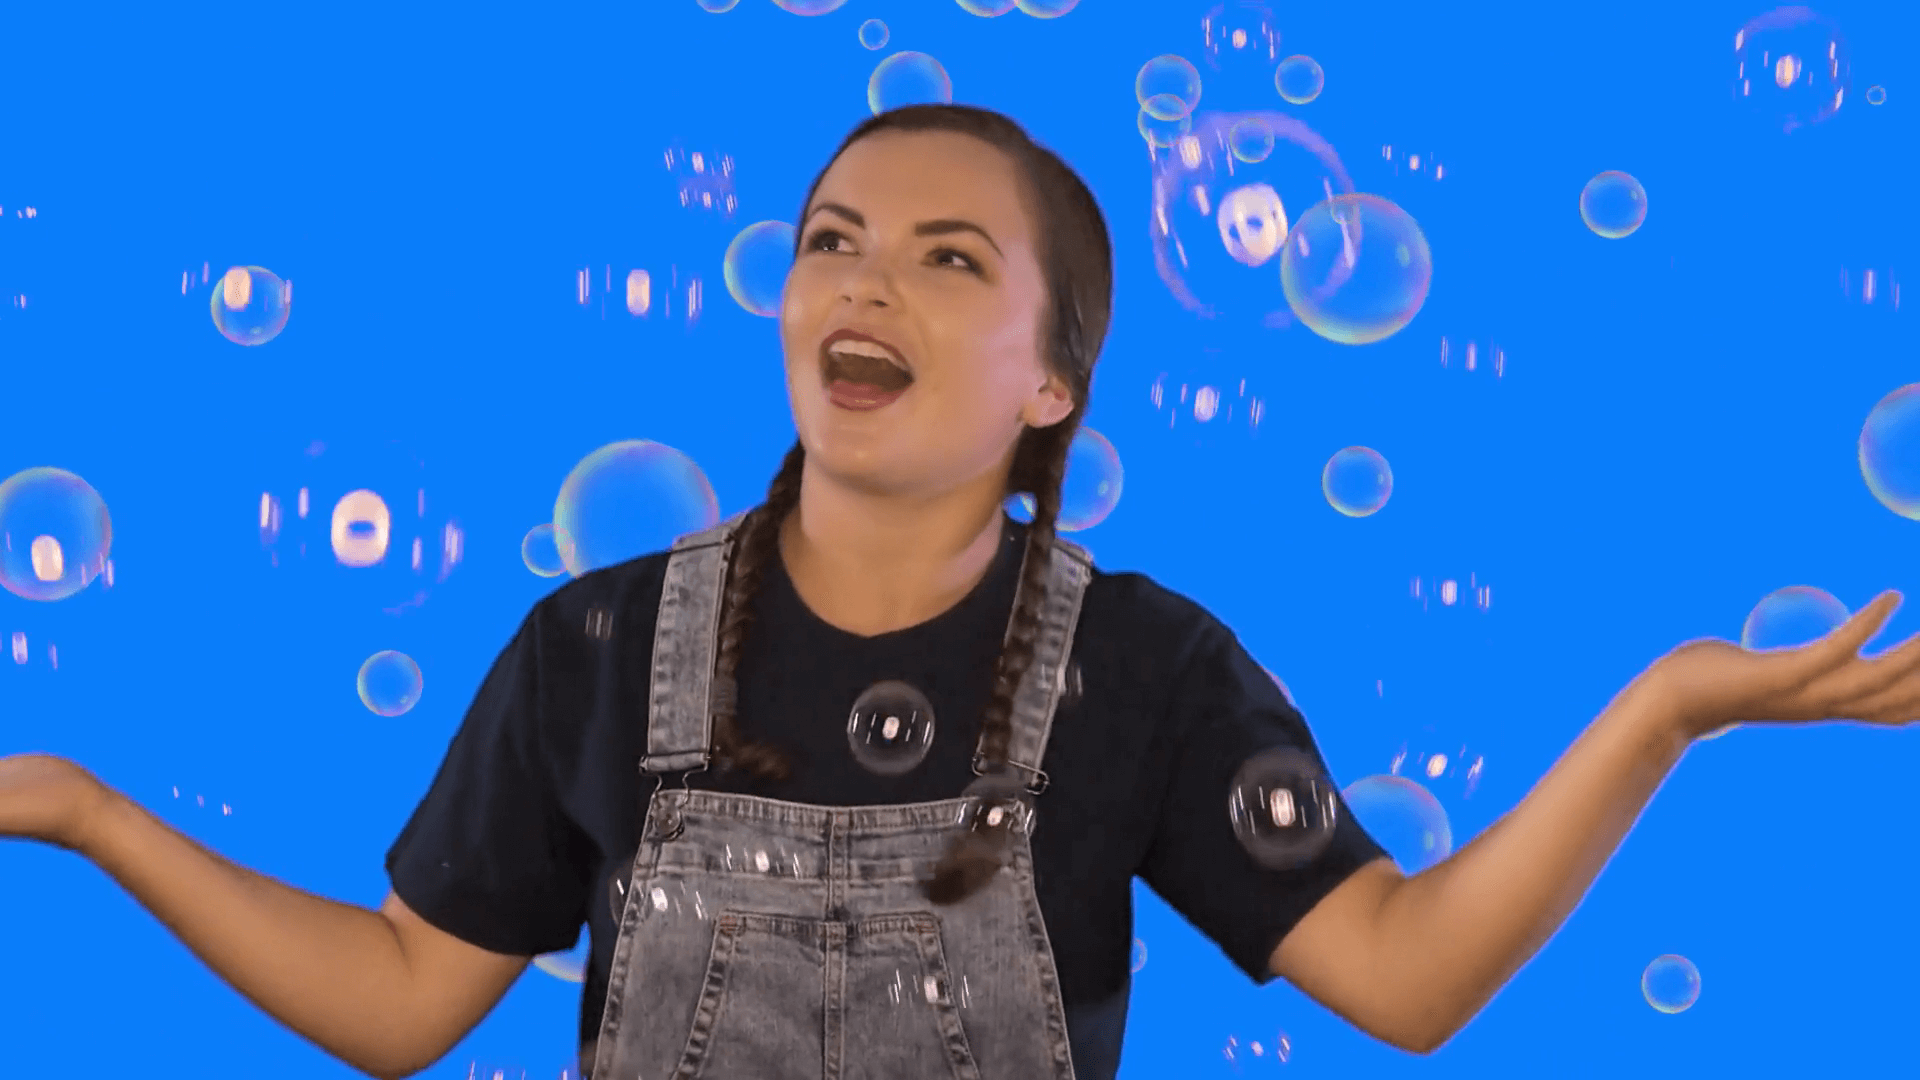 Kiki sings in Kiki's Music Time music video for toddlers on KneeBouncers, bubble popping song